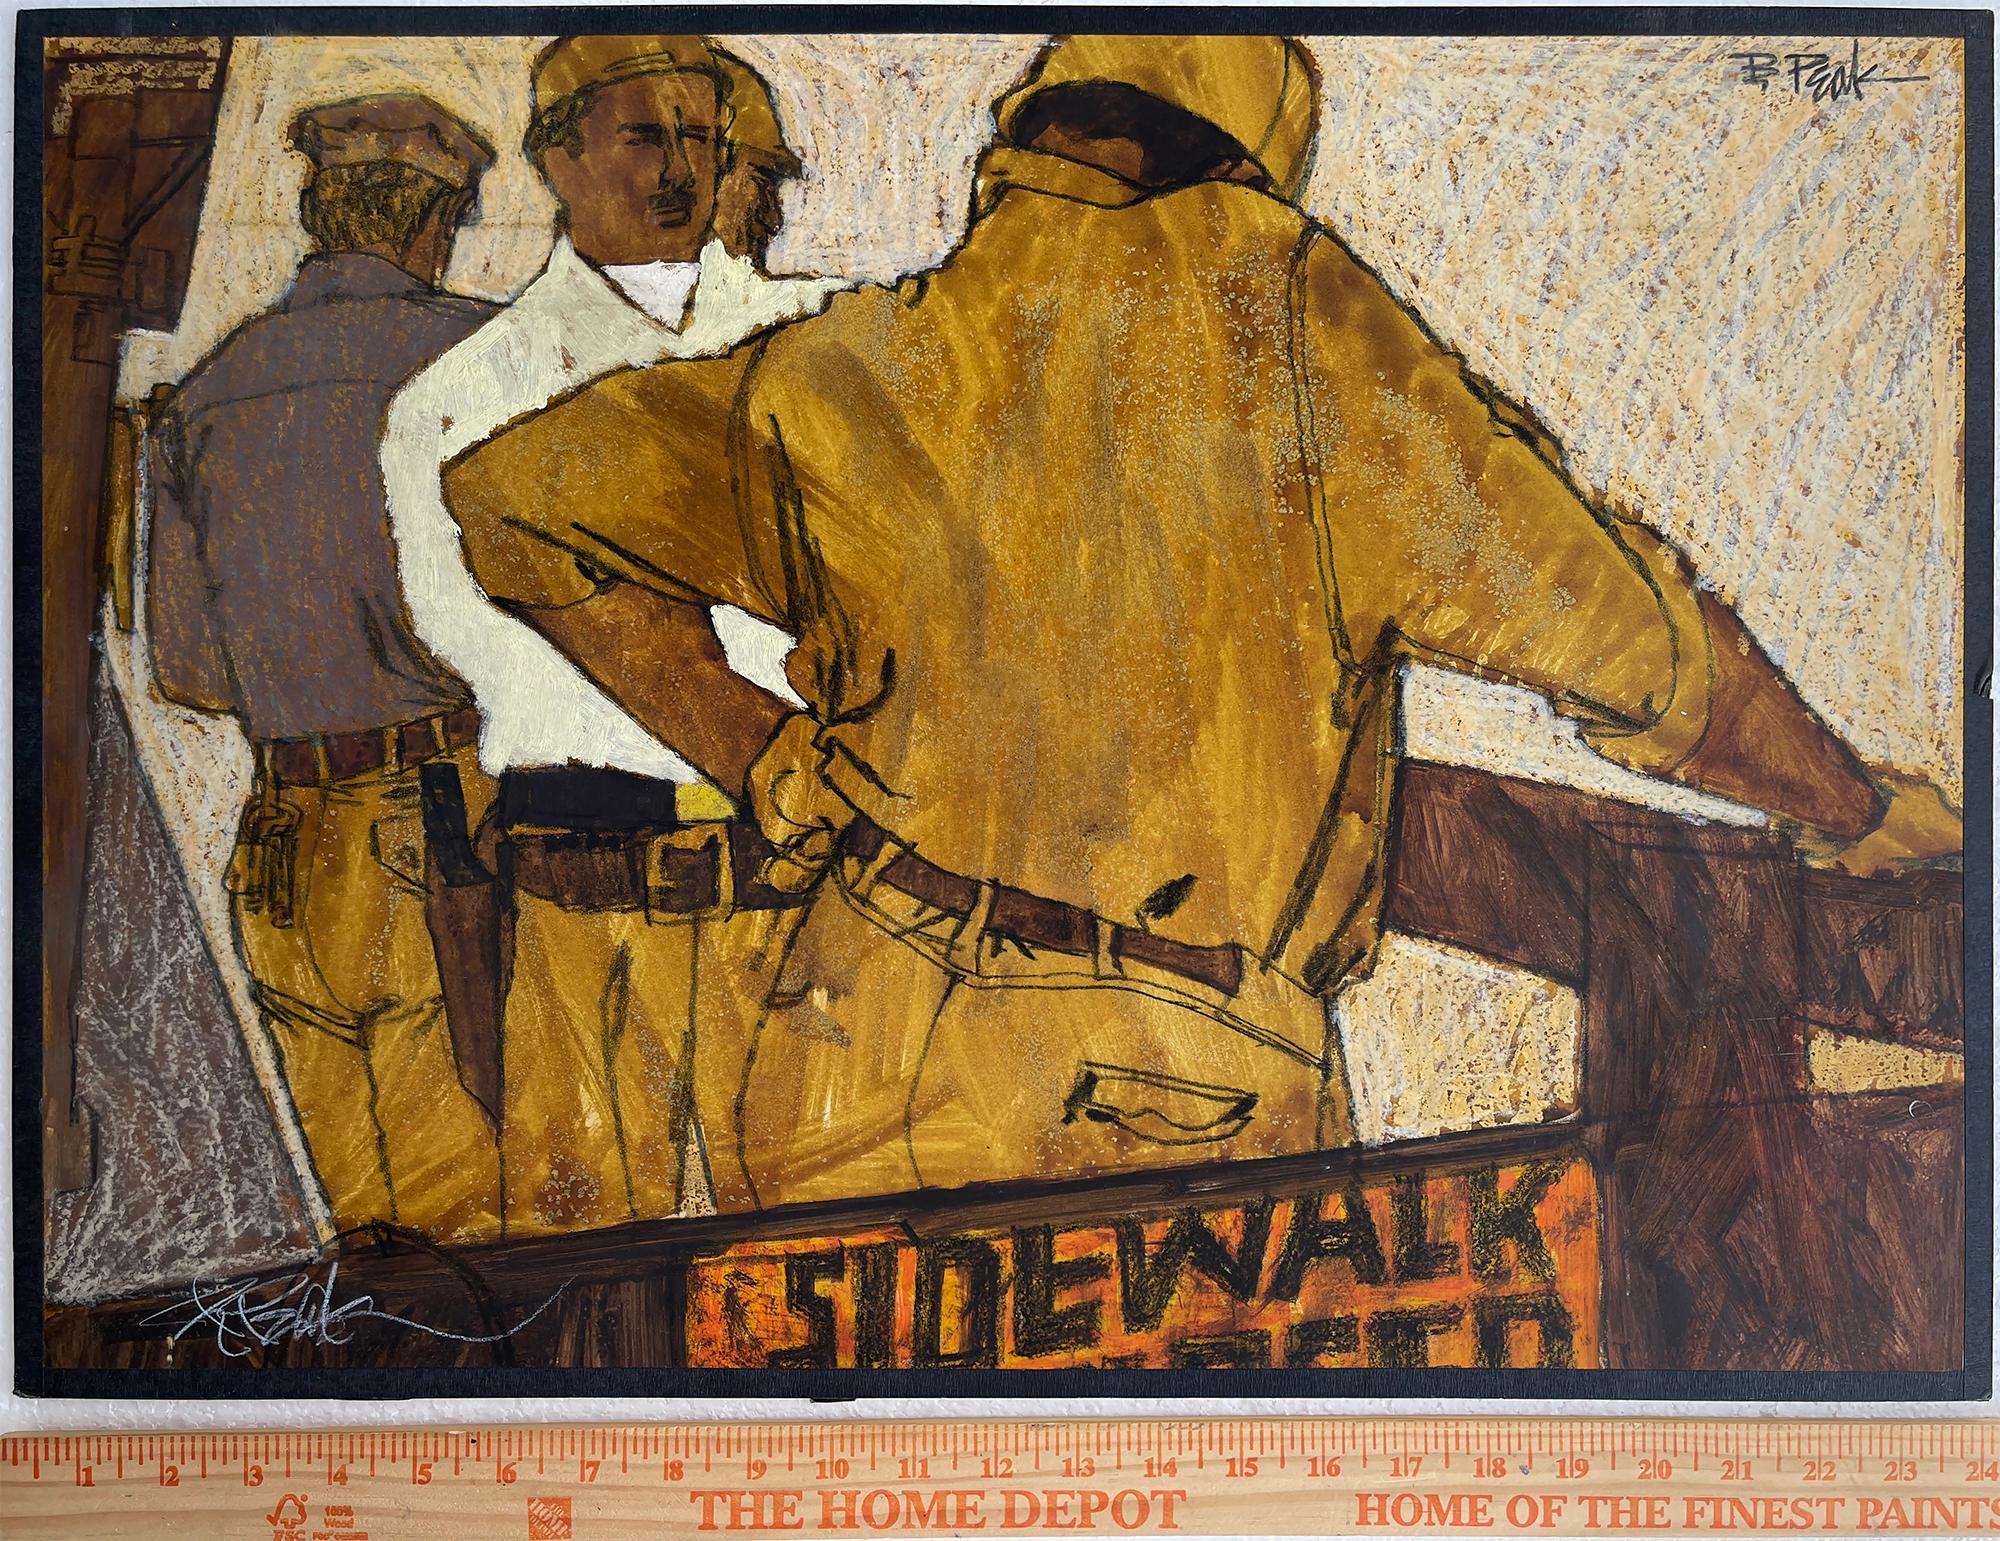 Construction Workers Painted the Style of Vuillard  Post-Impression Les Nabis - Painting by Bob Peak